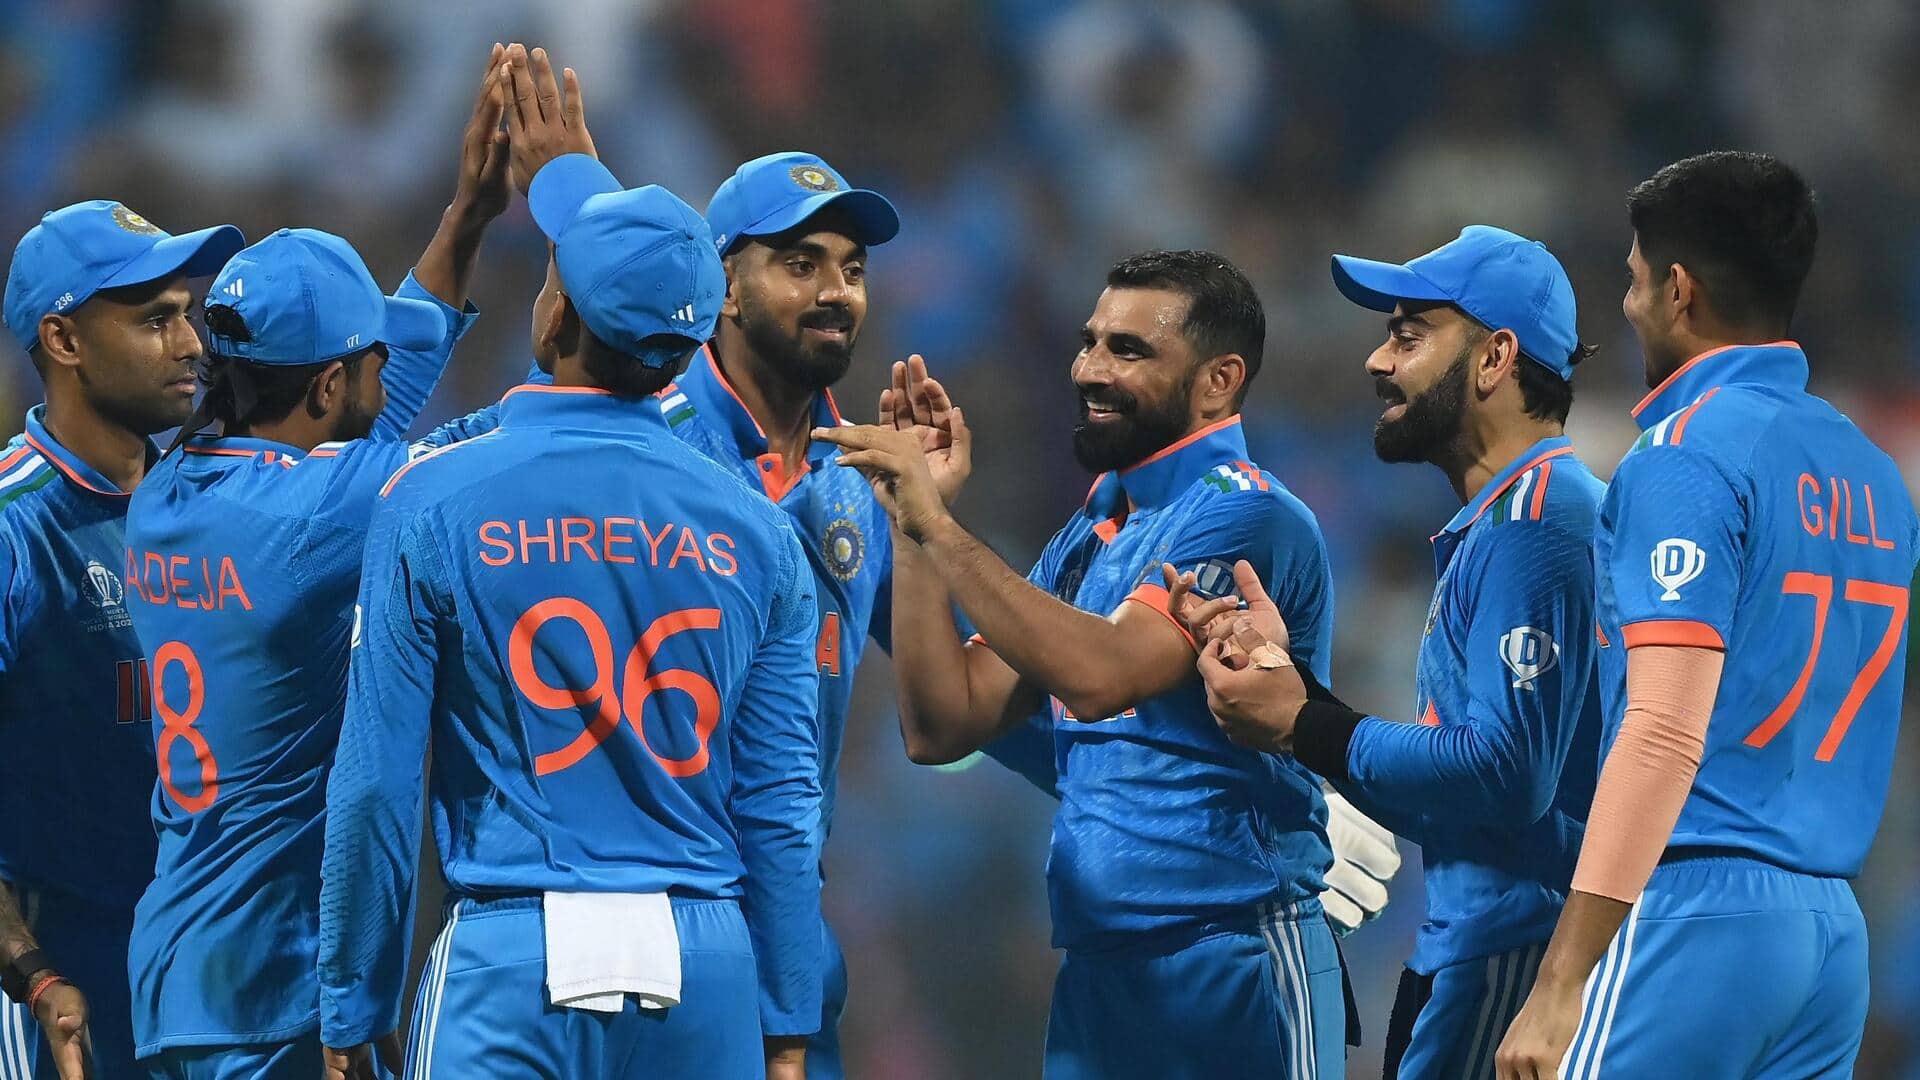 ICC Cricket World Cup, India vs South Africa: Statistical preview